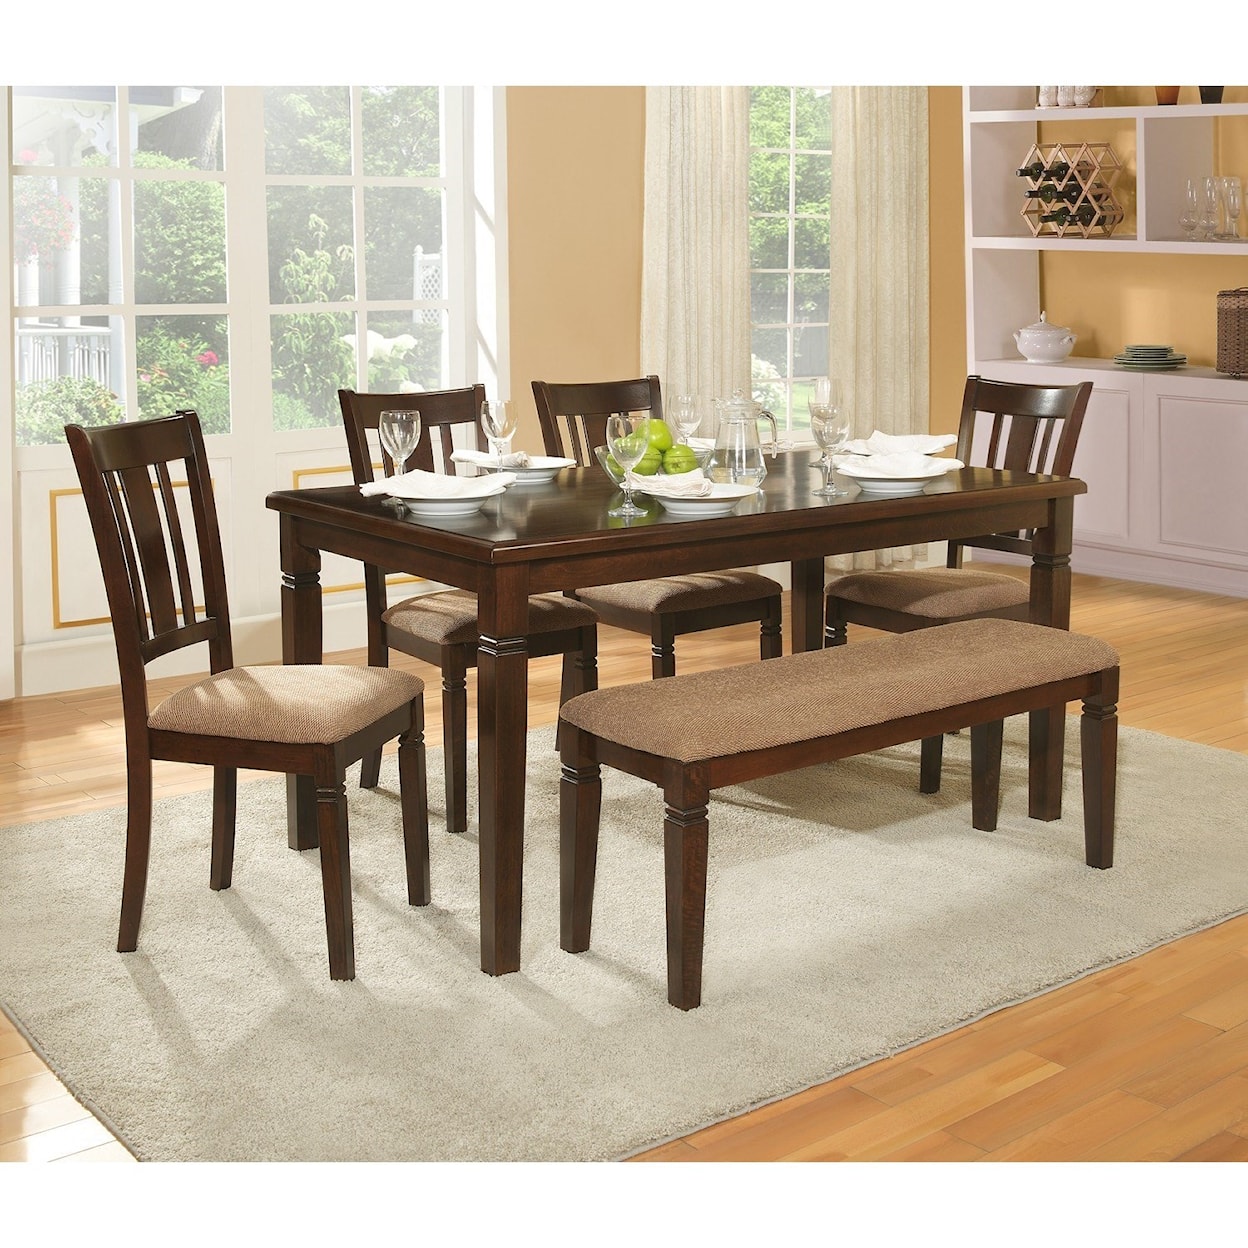 Homelegance Furniture Devlin Table and Chair Set with Bench